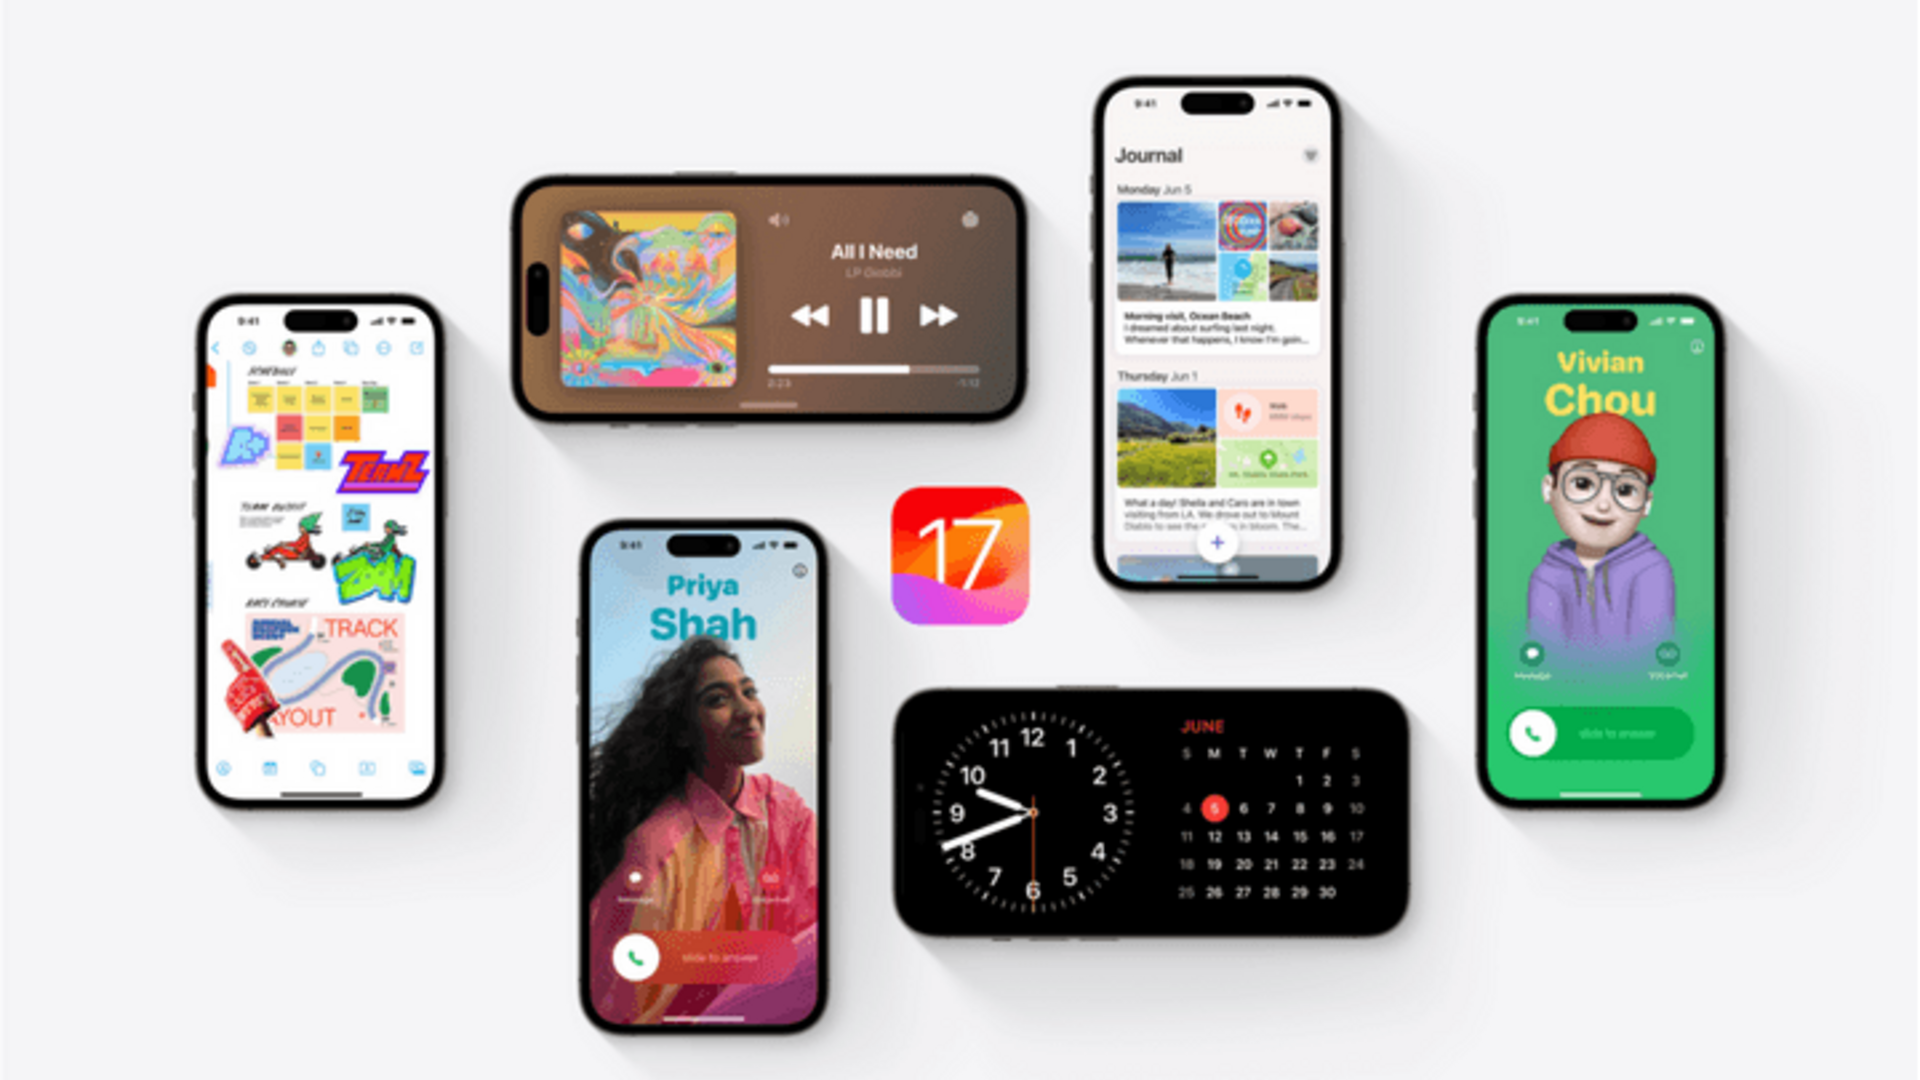 Apple's iOS 17 will be available on September 18 